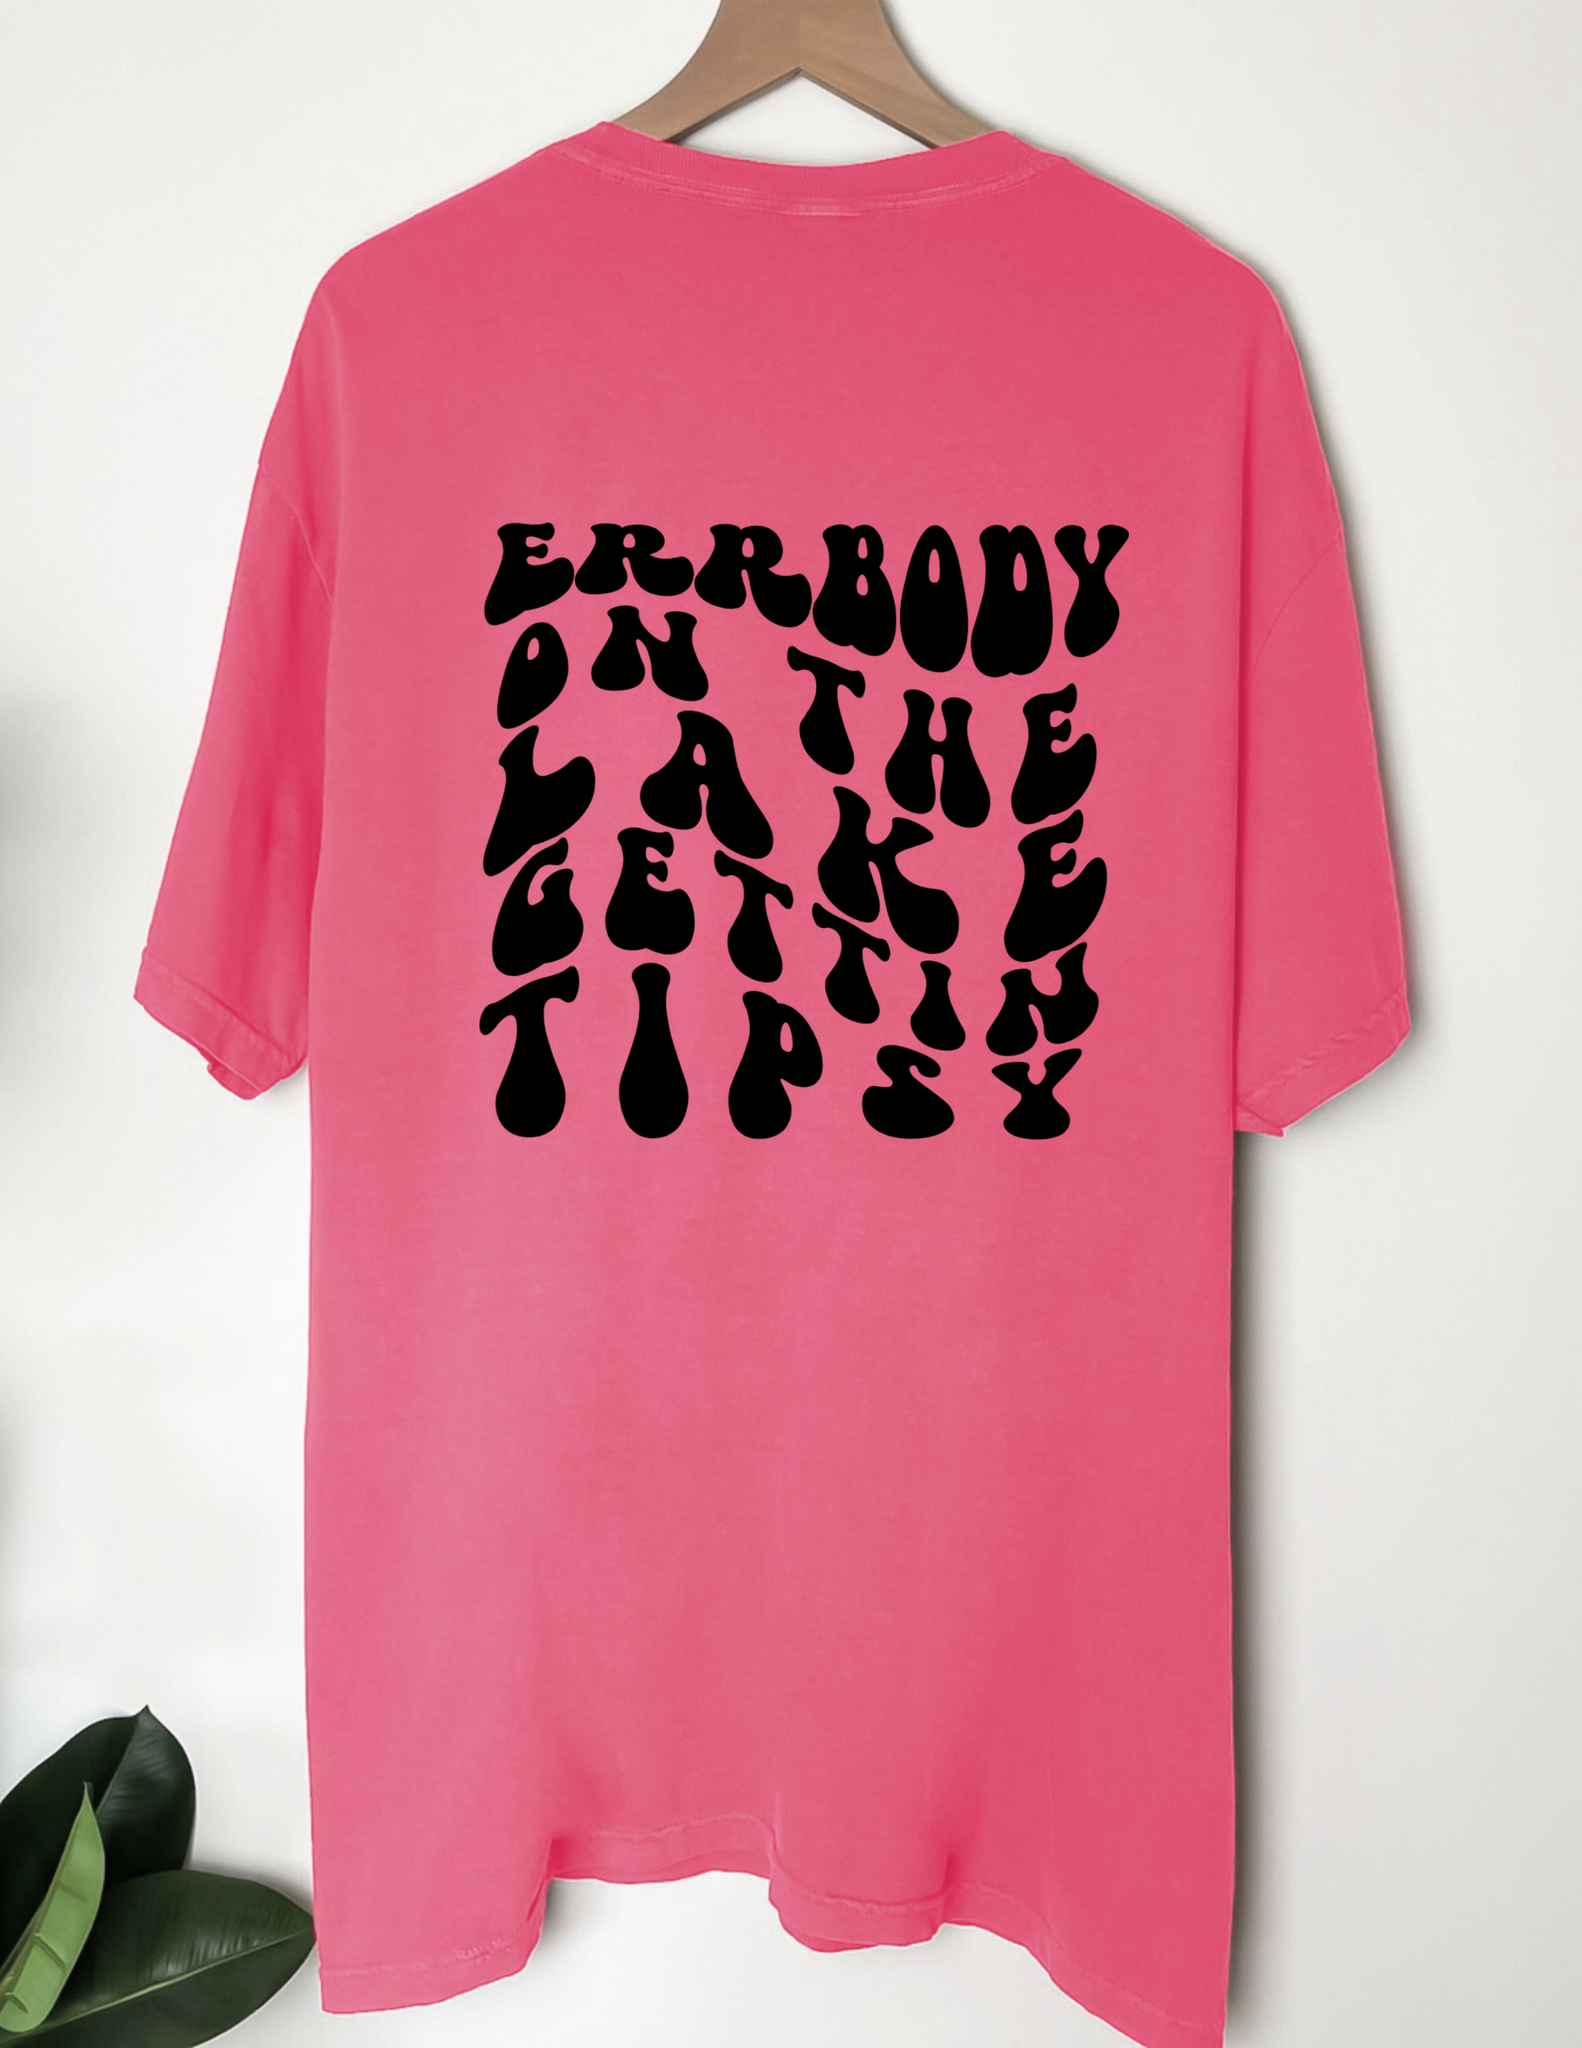 ERRBODY ON THE LAKE GETTIN TIPSY Comfort Color Tee - Crunchberry